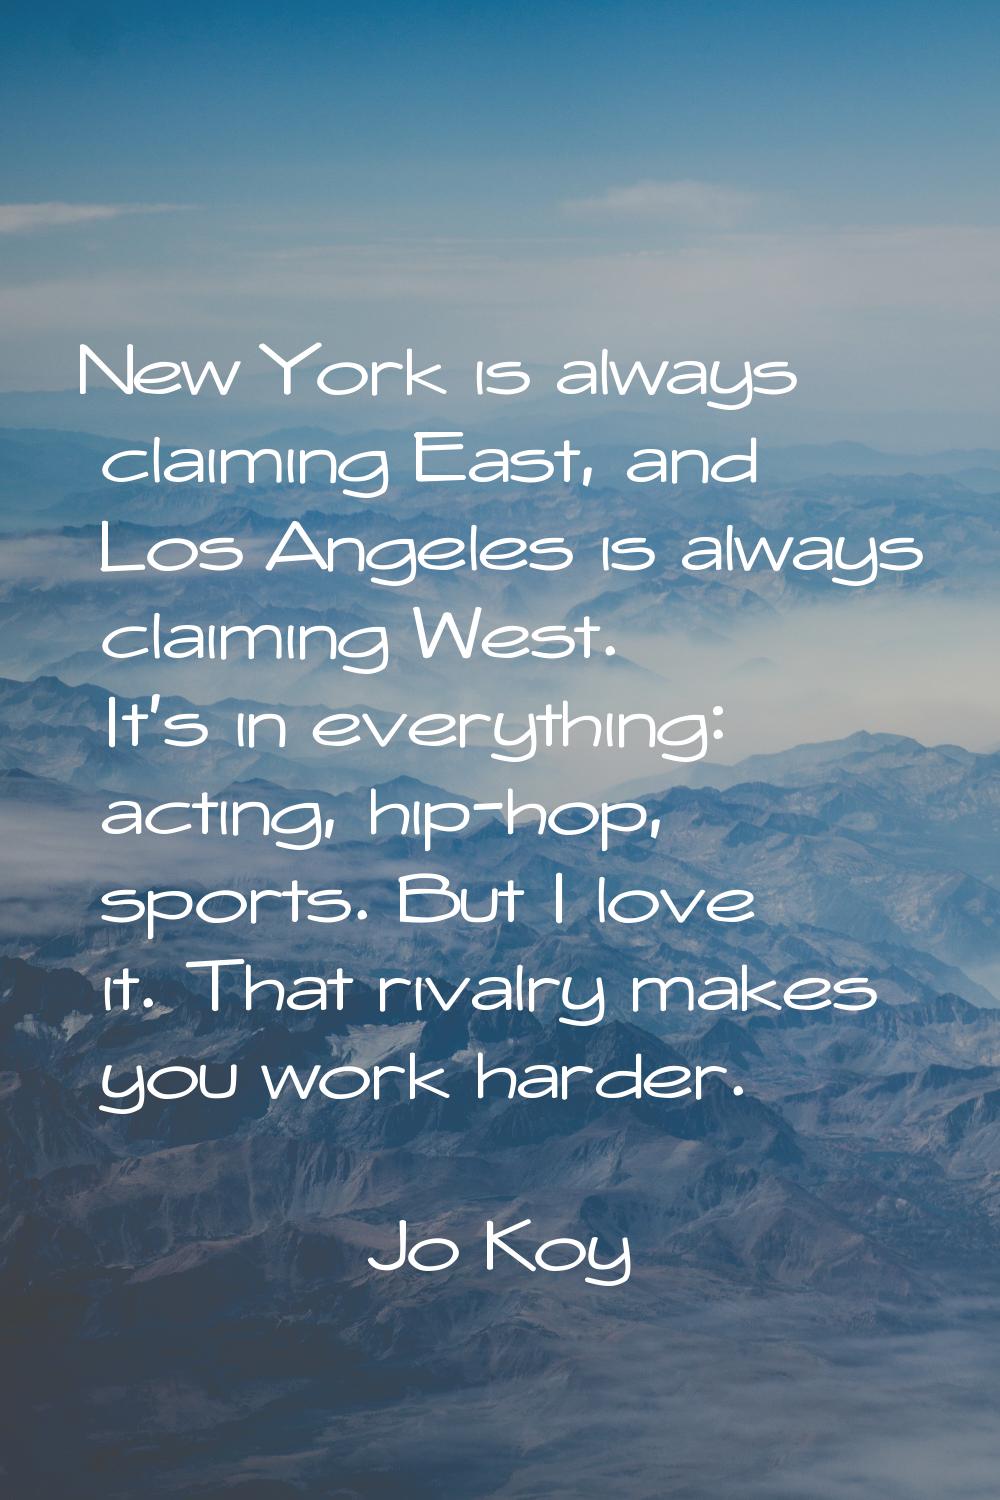 New York is always claiming East, and Los Angeles is always claiming West. It's in everything: acti